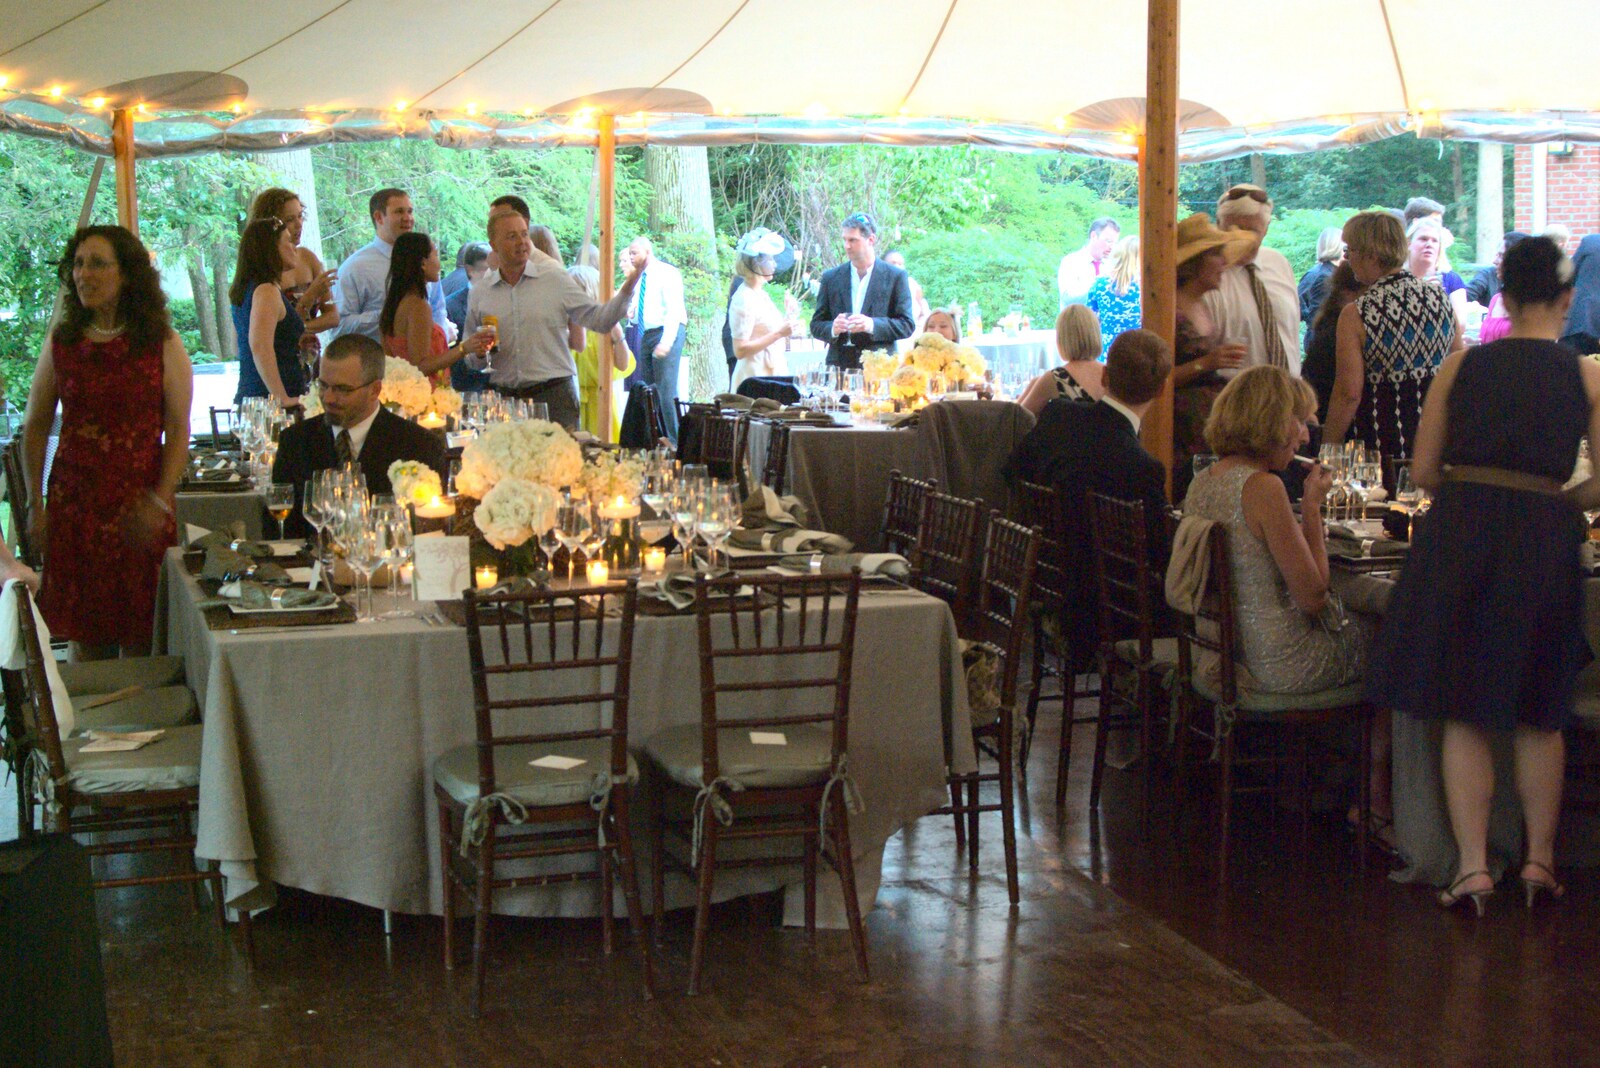 Out in the marquee from Phil and Tania's Wedding, Short Hills, New Jersey, USA - 20th August 2011